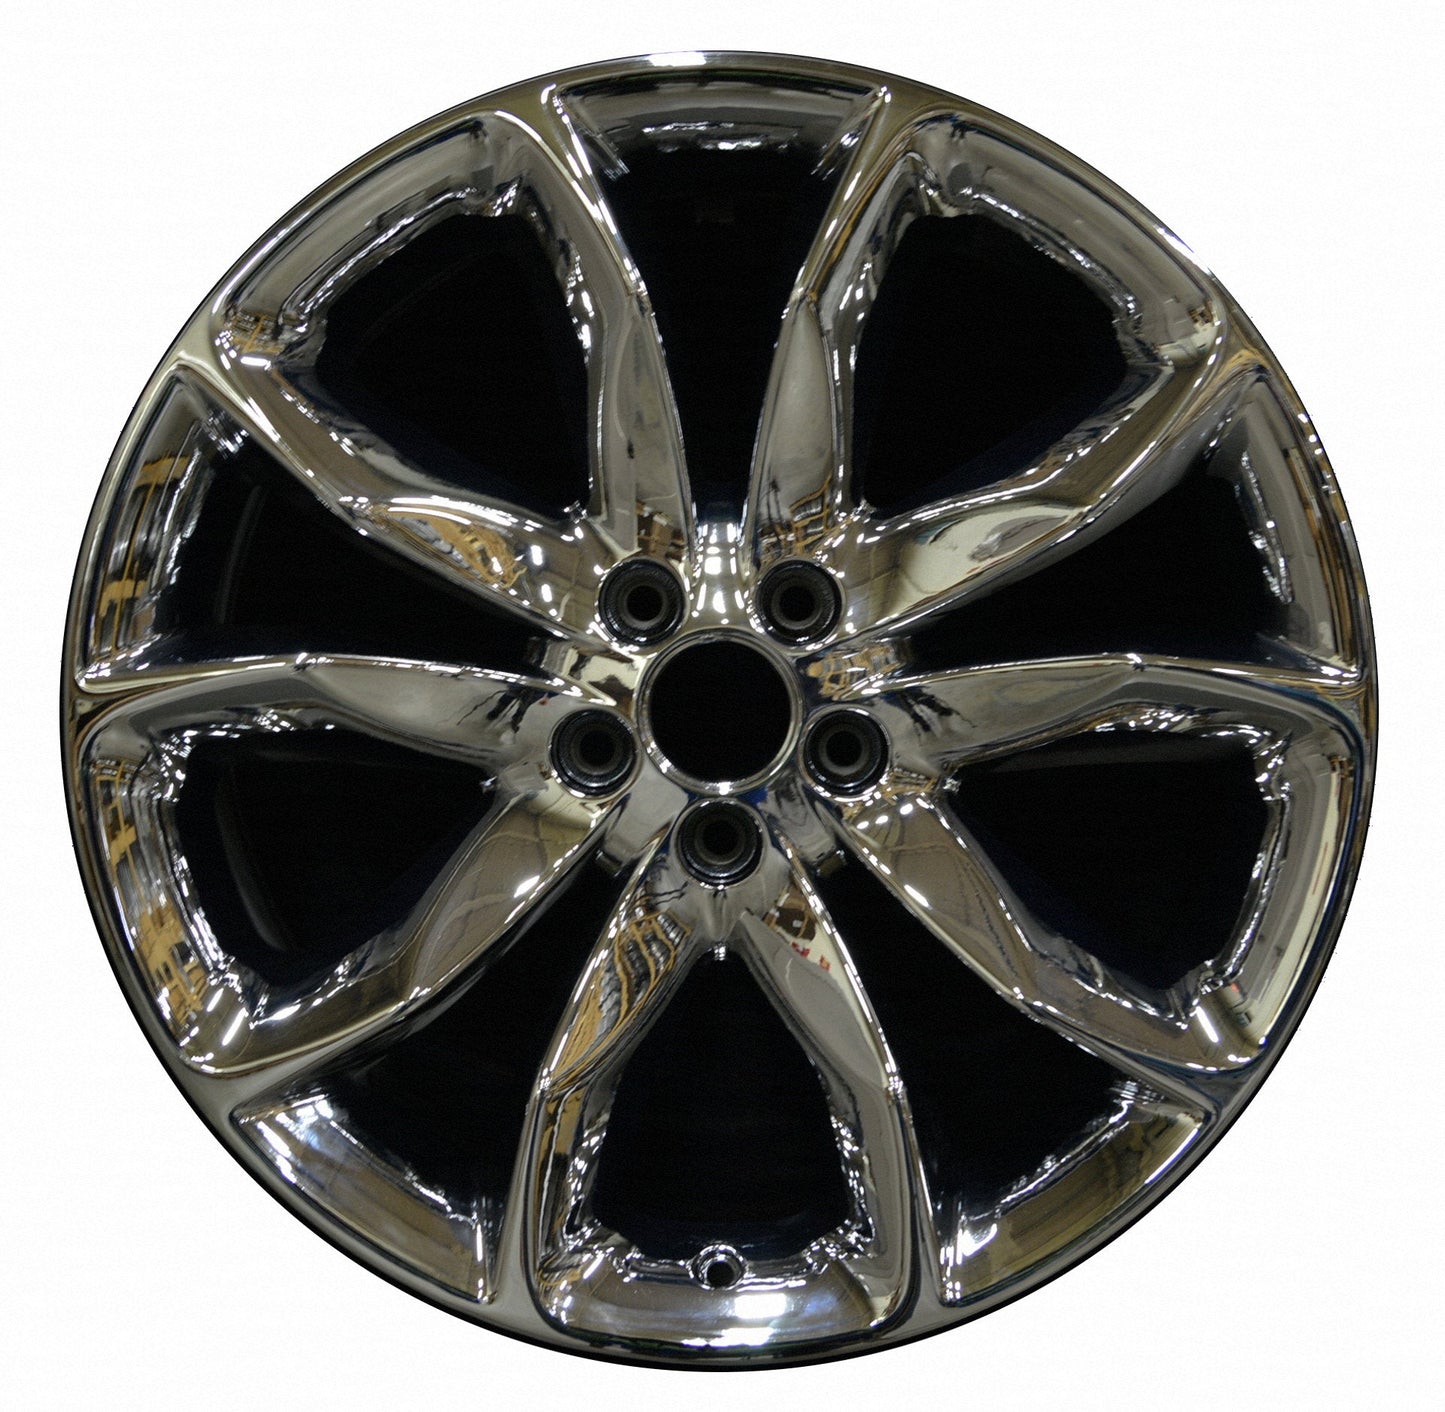 Ford Explorer  2011, 2012, 2013, 2014, 2015 Factory OEM Car Wheel Size 20x8.5 Alloy WAO.3861.PVD1.FF